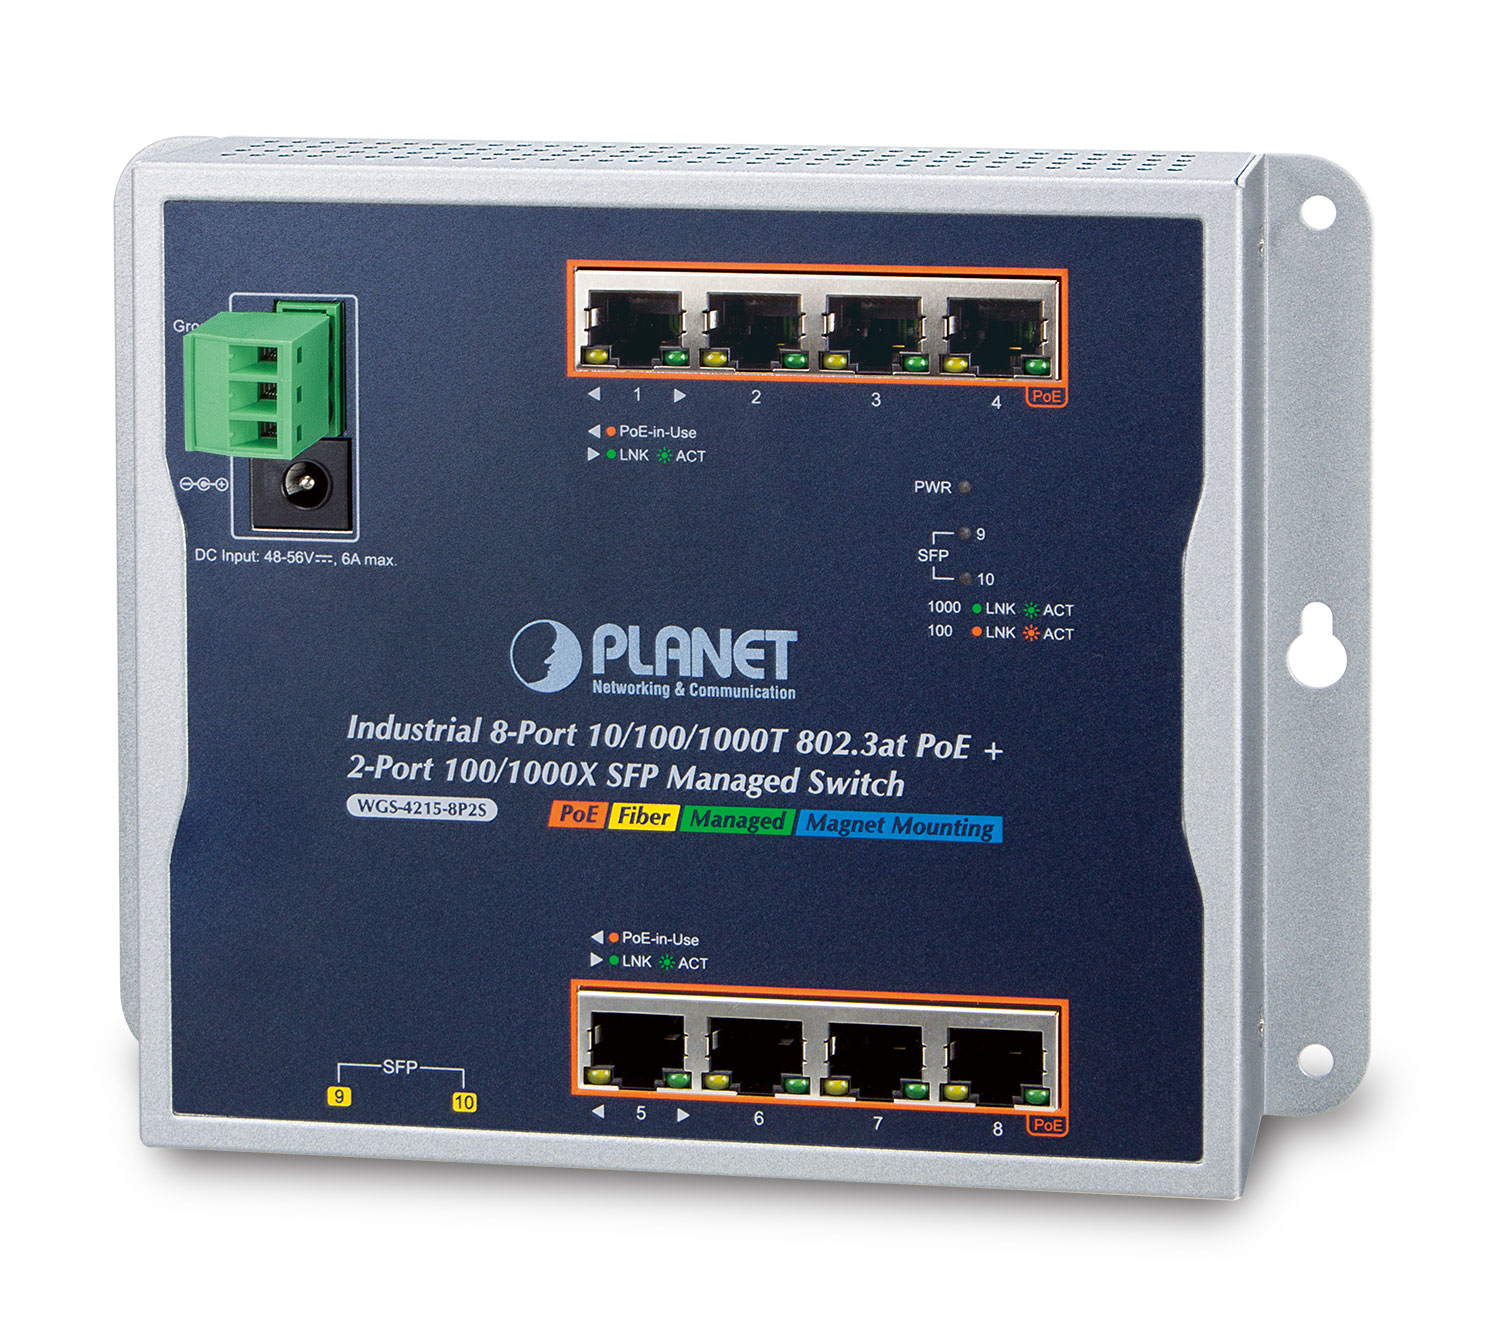 PLANET WGS-4215-8P2S network switch Managed Gigabit Ethernet (10/100/1000) Power over Ethernet (PoE) Black